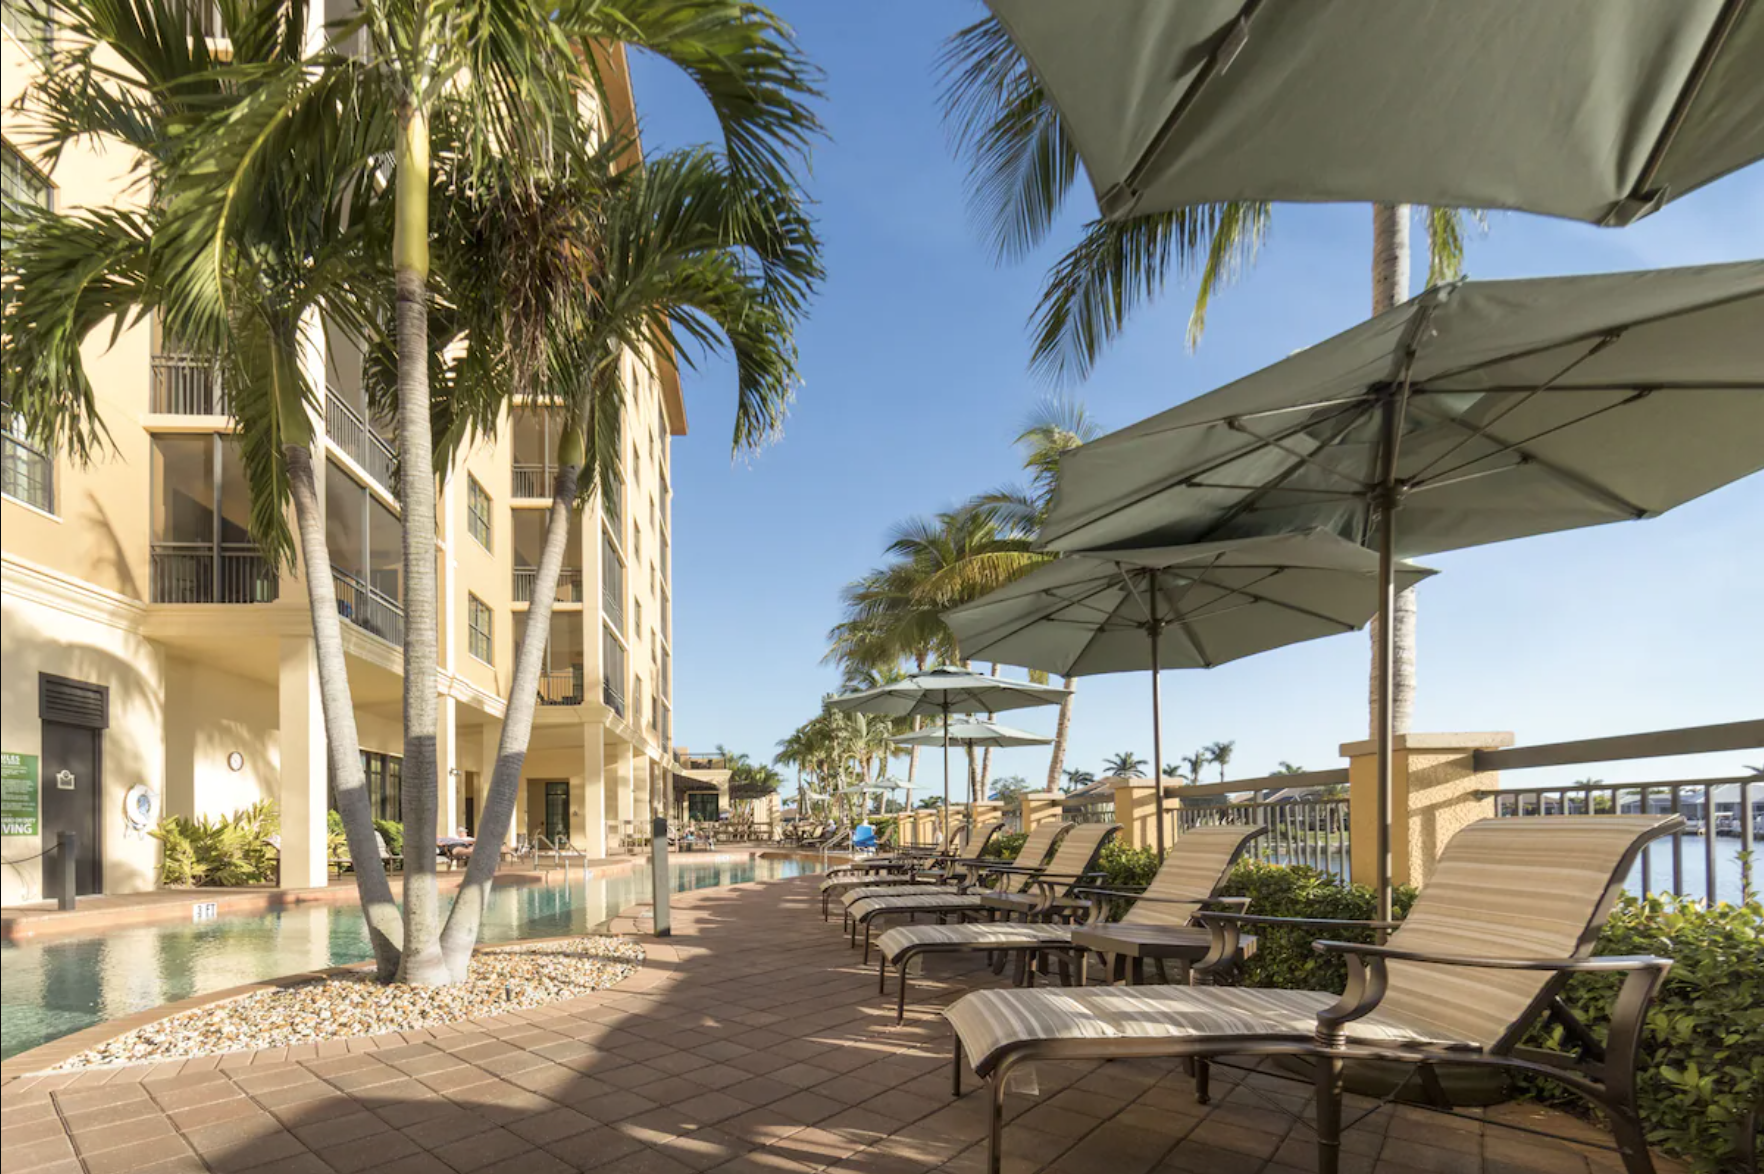 swim out rooms on the main floor with lovely beach chairs giving a sense of privacy and being able to enjoy the gorgeous florida sunshine! A great option for the best beach resorts on marco island!